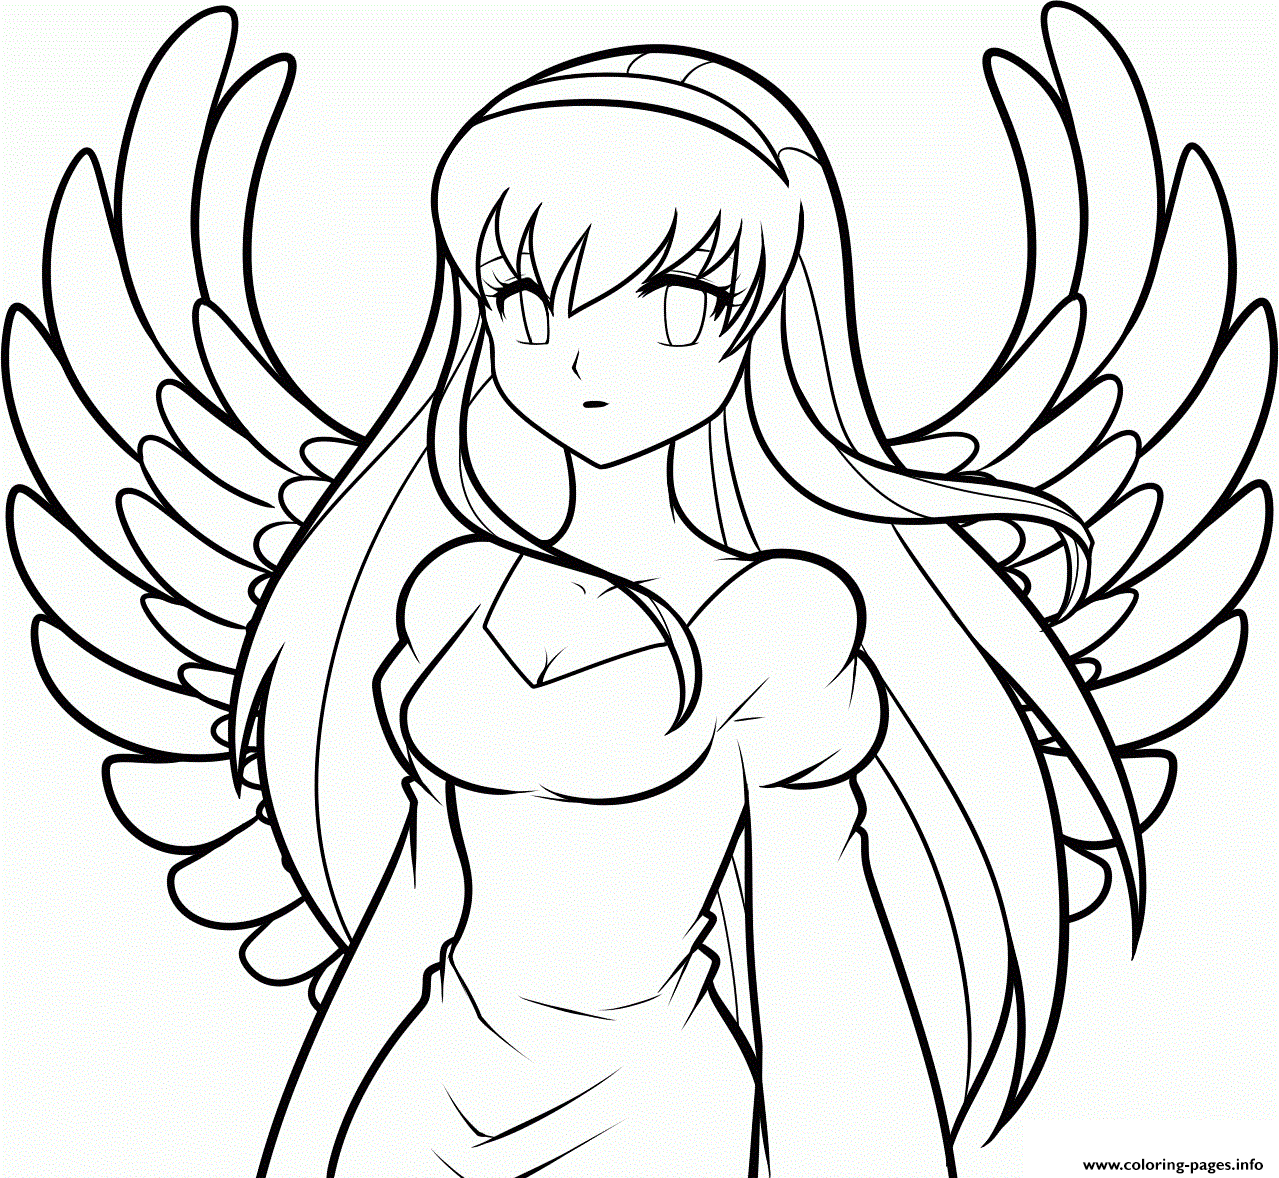 Easy Drawings To Draw Anime Angel Girl Coloring Pages ...